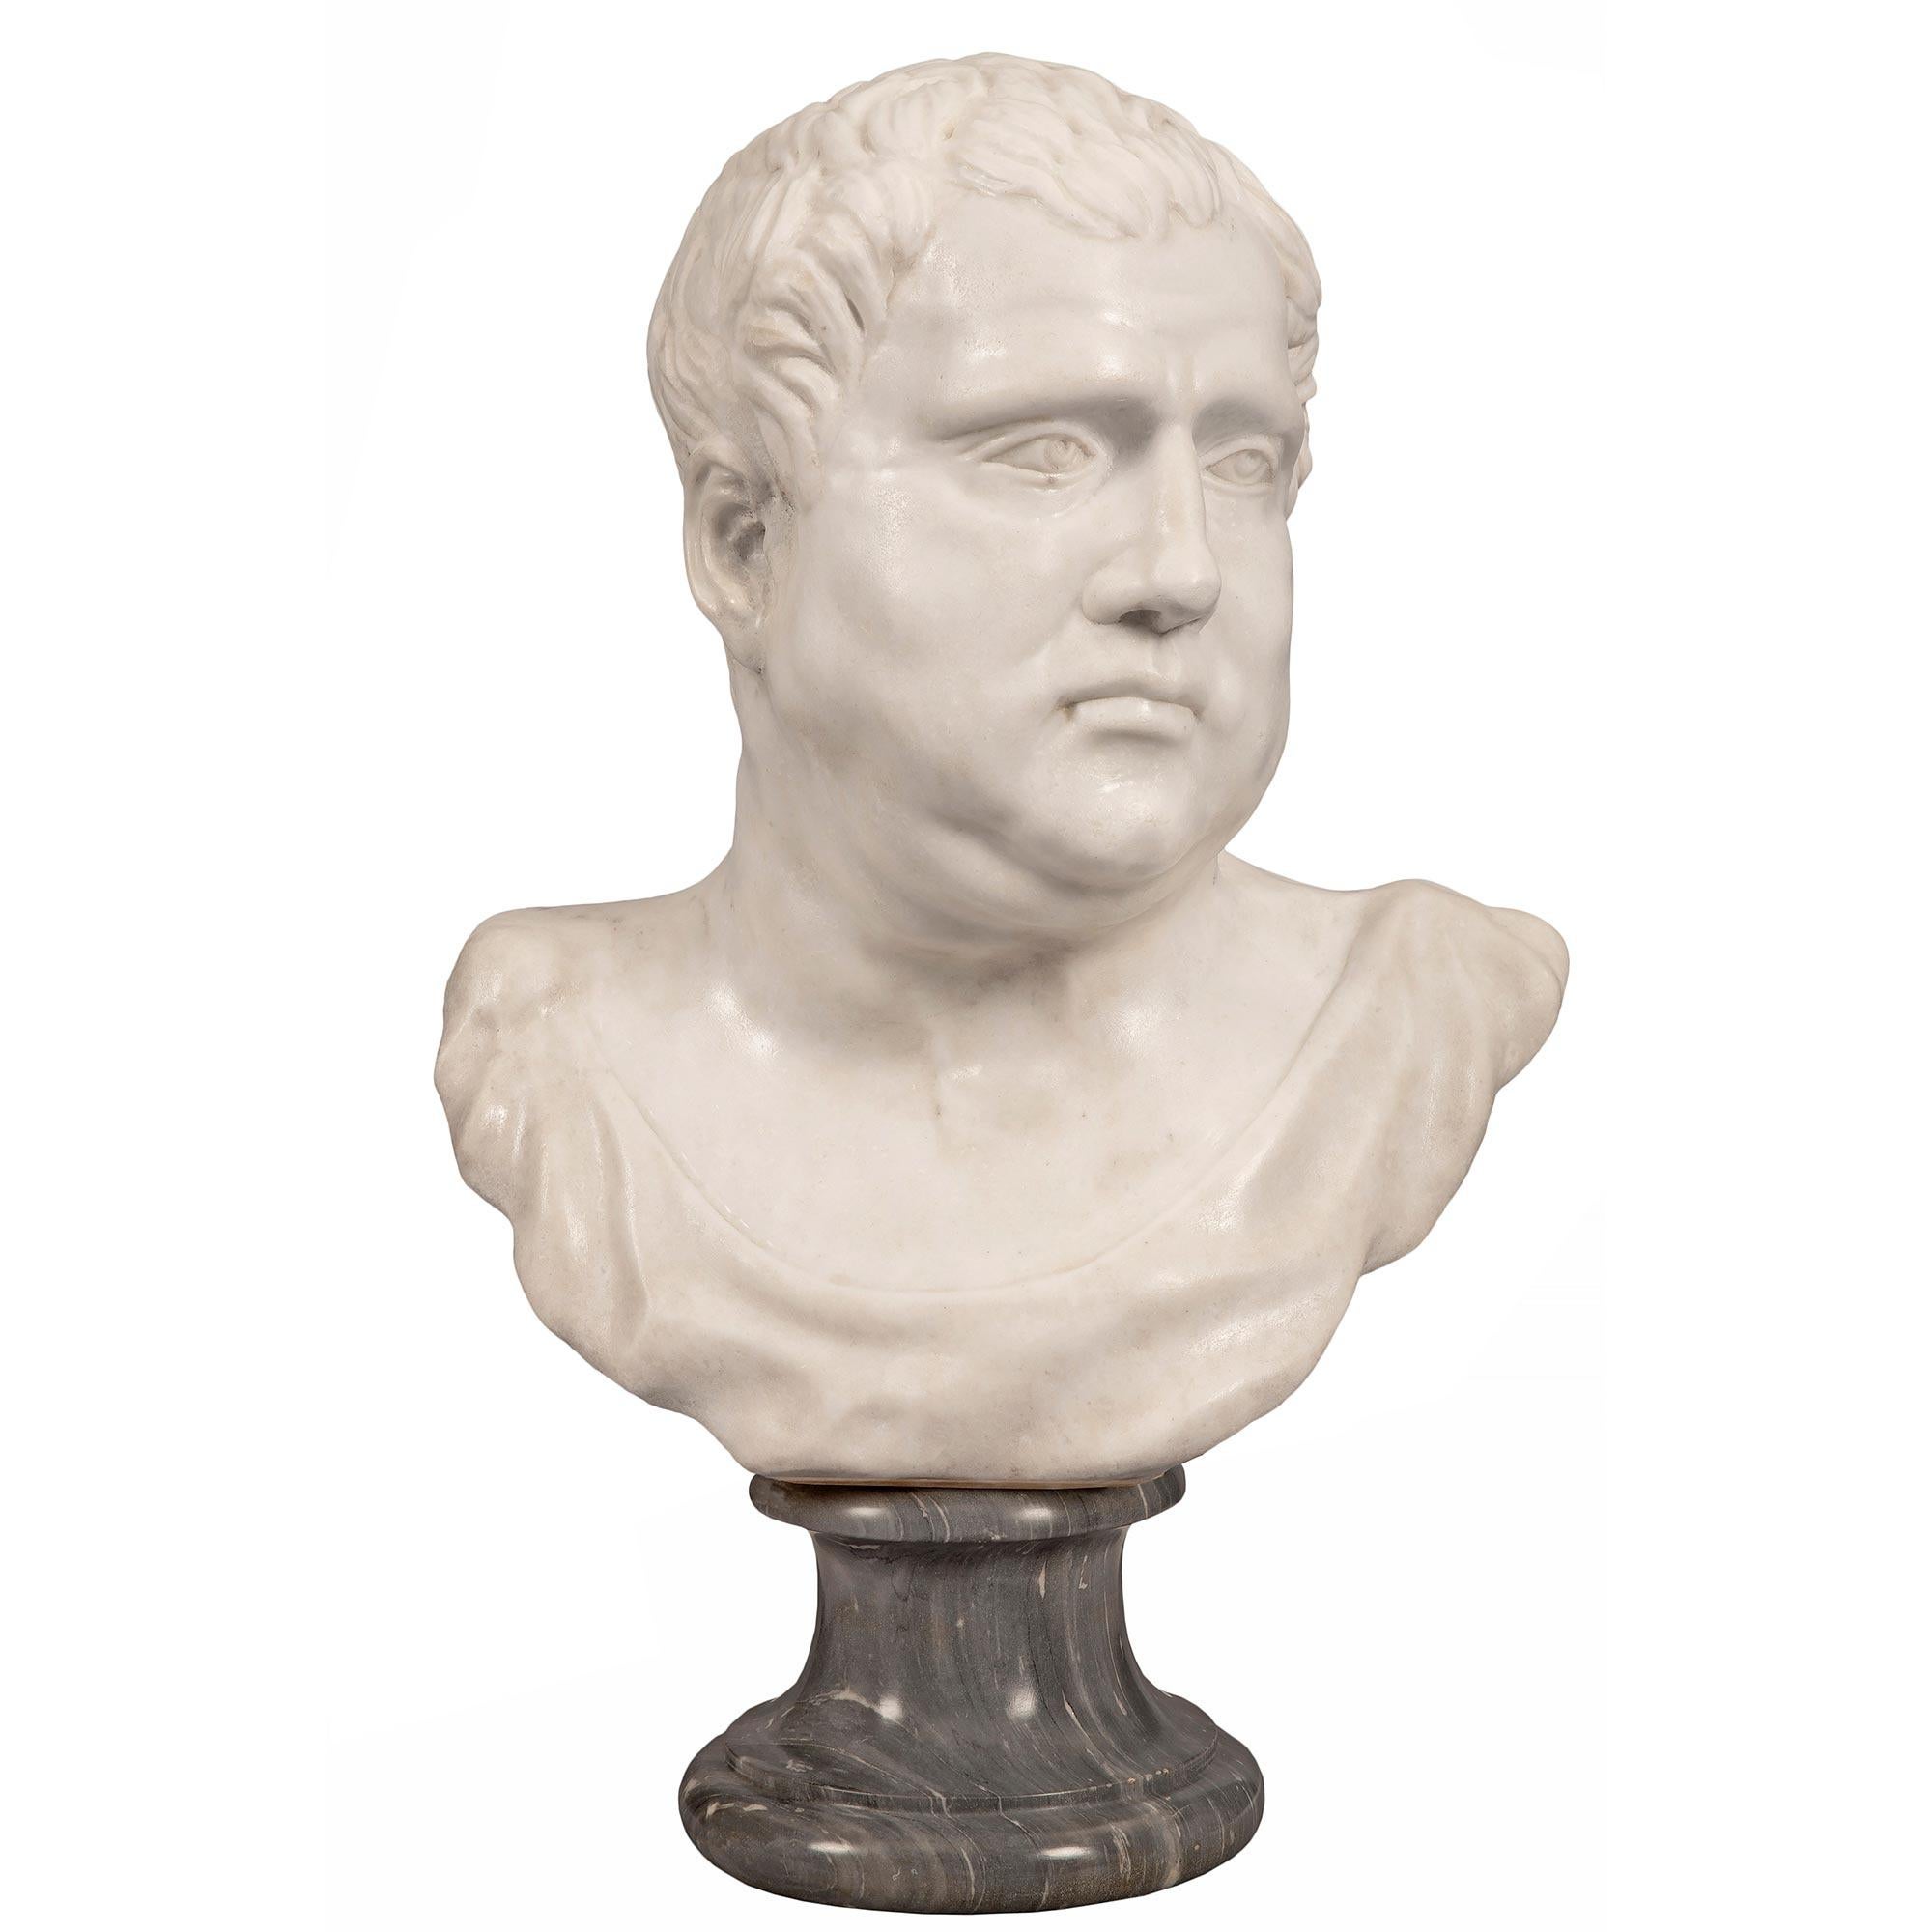 Italian Early 19th Century White Carrara Marble Bust of a Roman Emperor For Sale